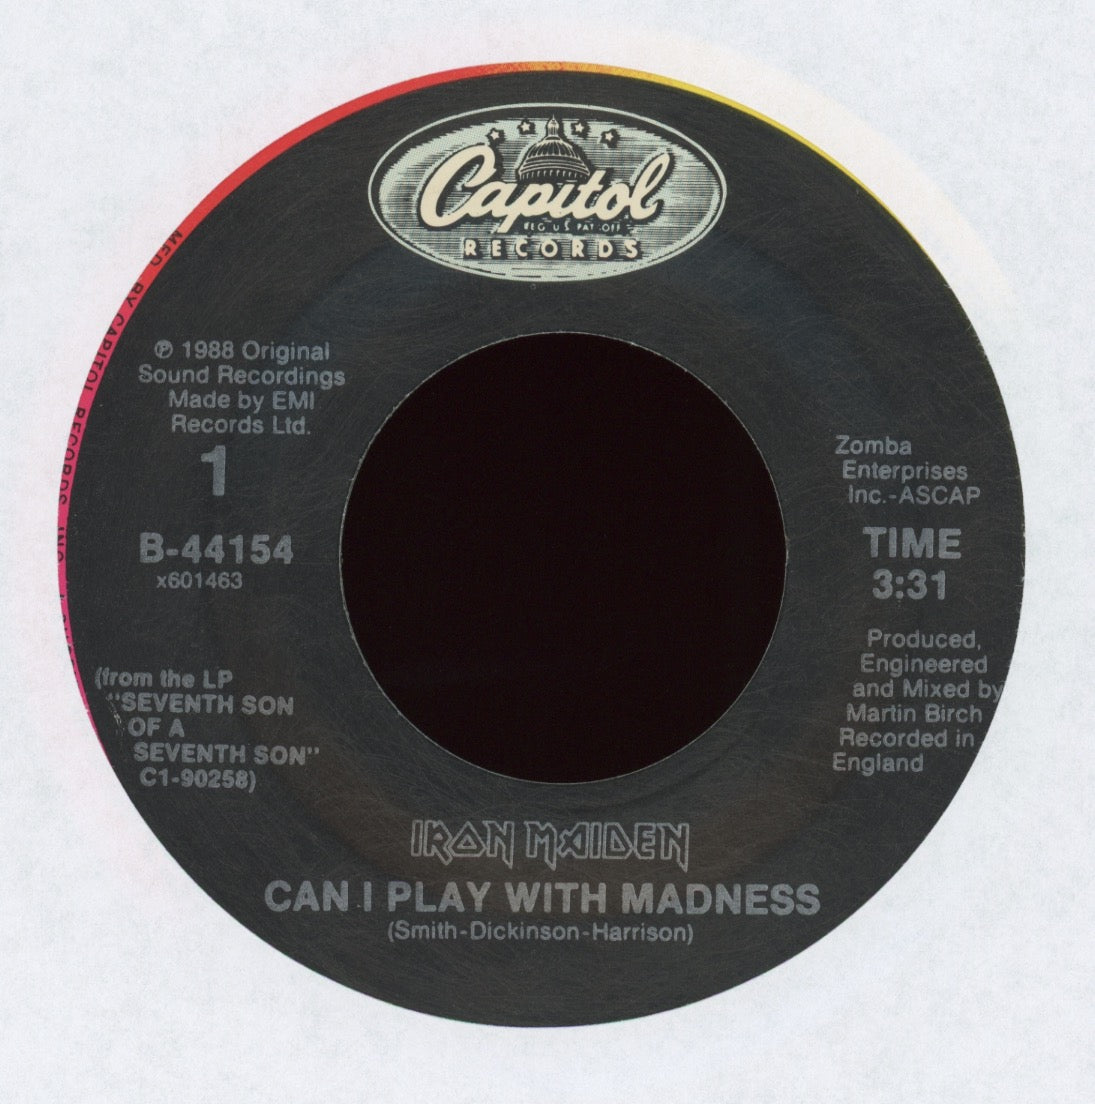 Iron Maiden - Can I Play With Madness on Capitol With Picture Sleeve